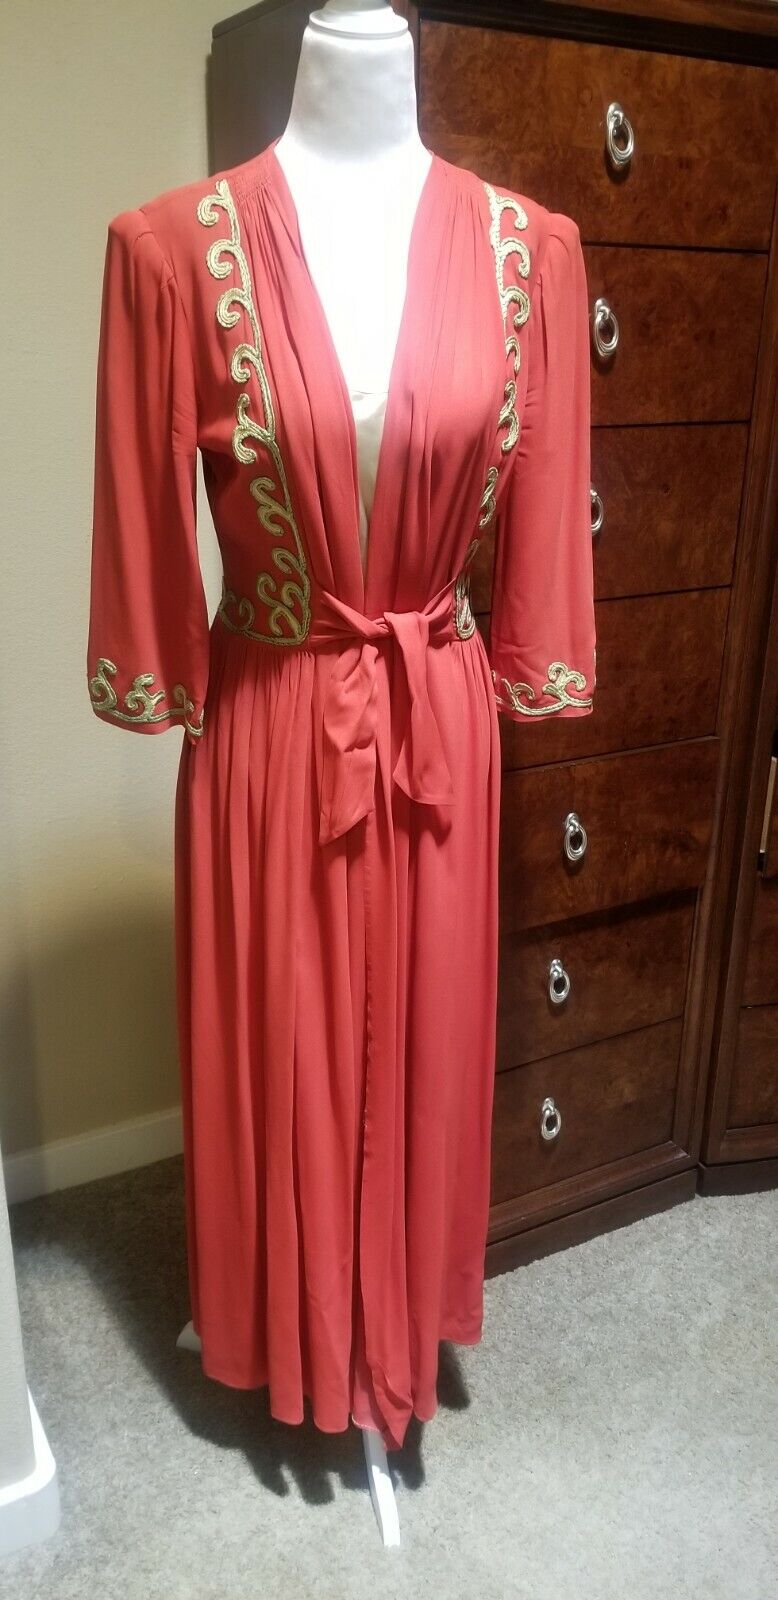 1940s Vintage Dressing Gown - image 1